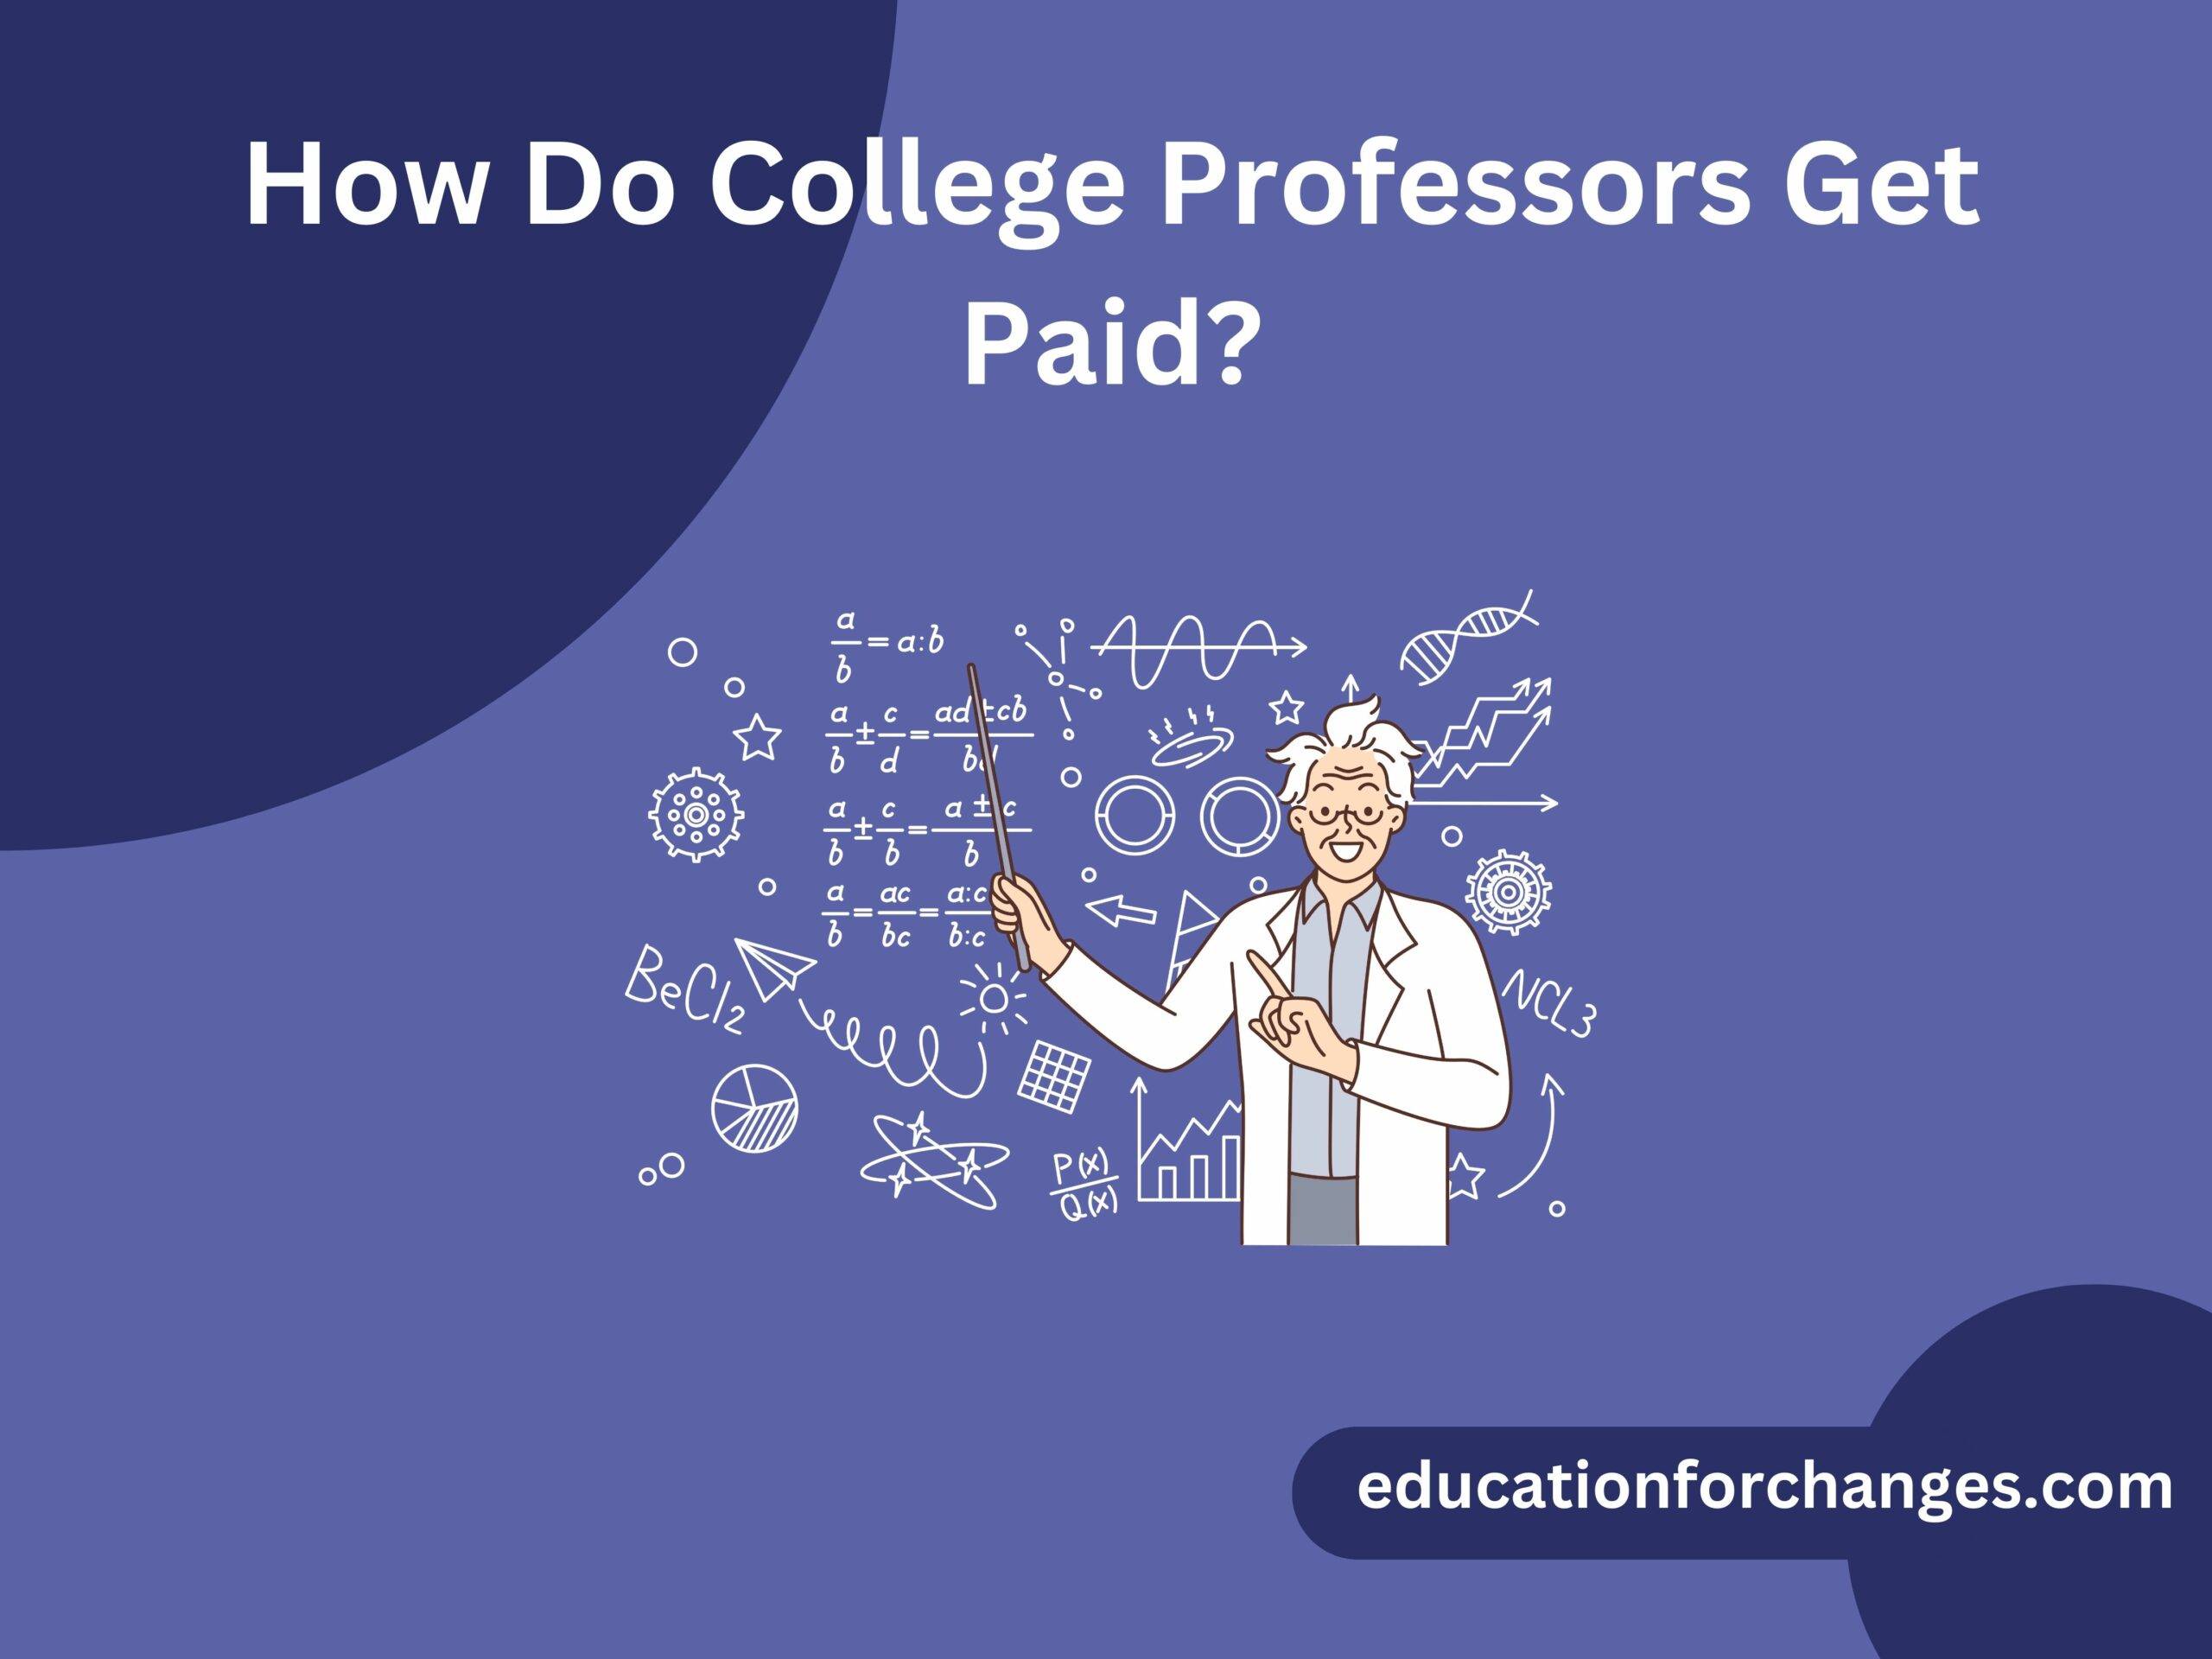 How Do College Professors Get Paid